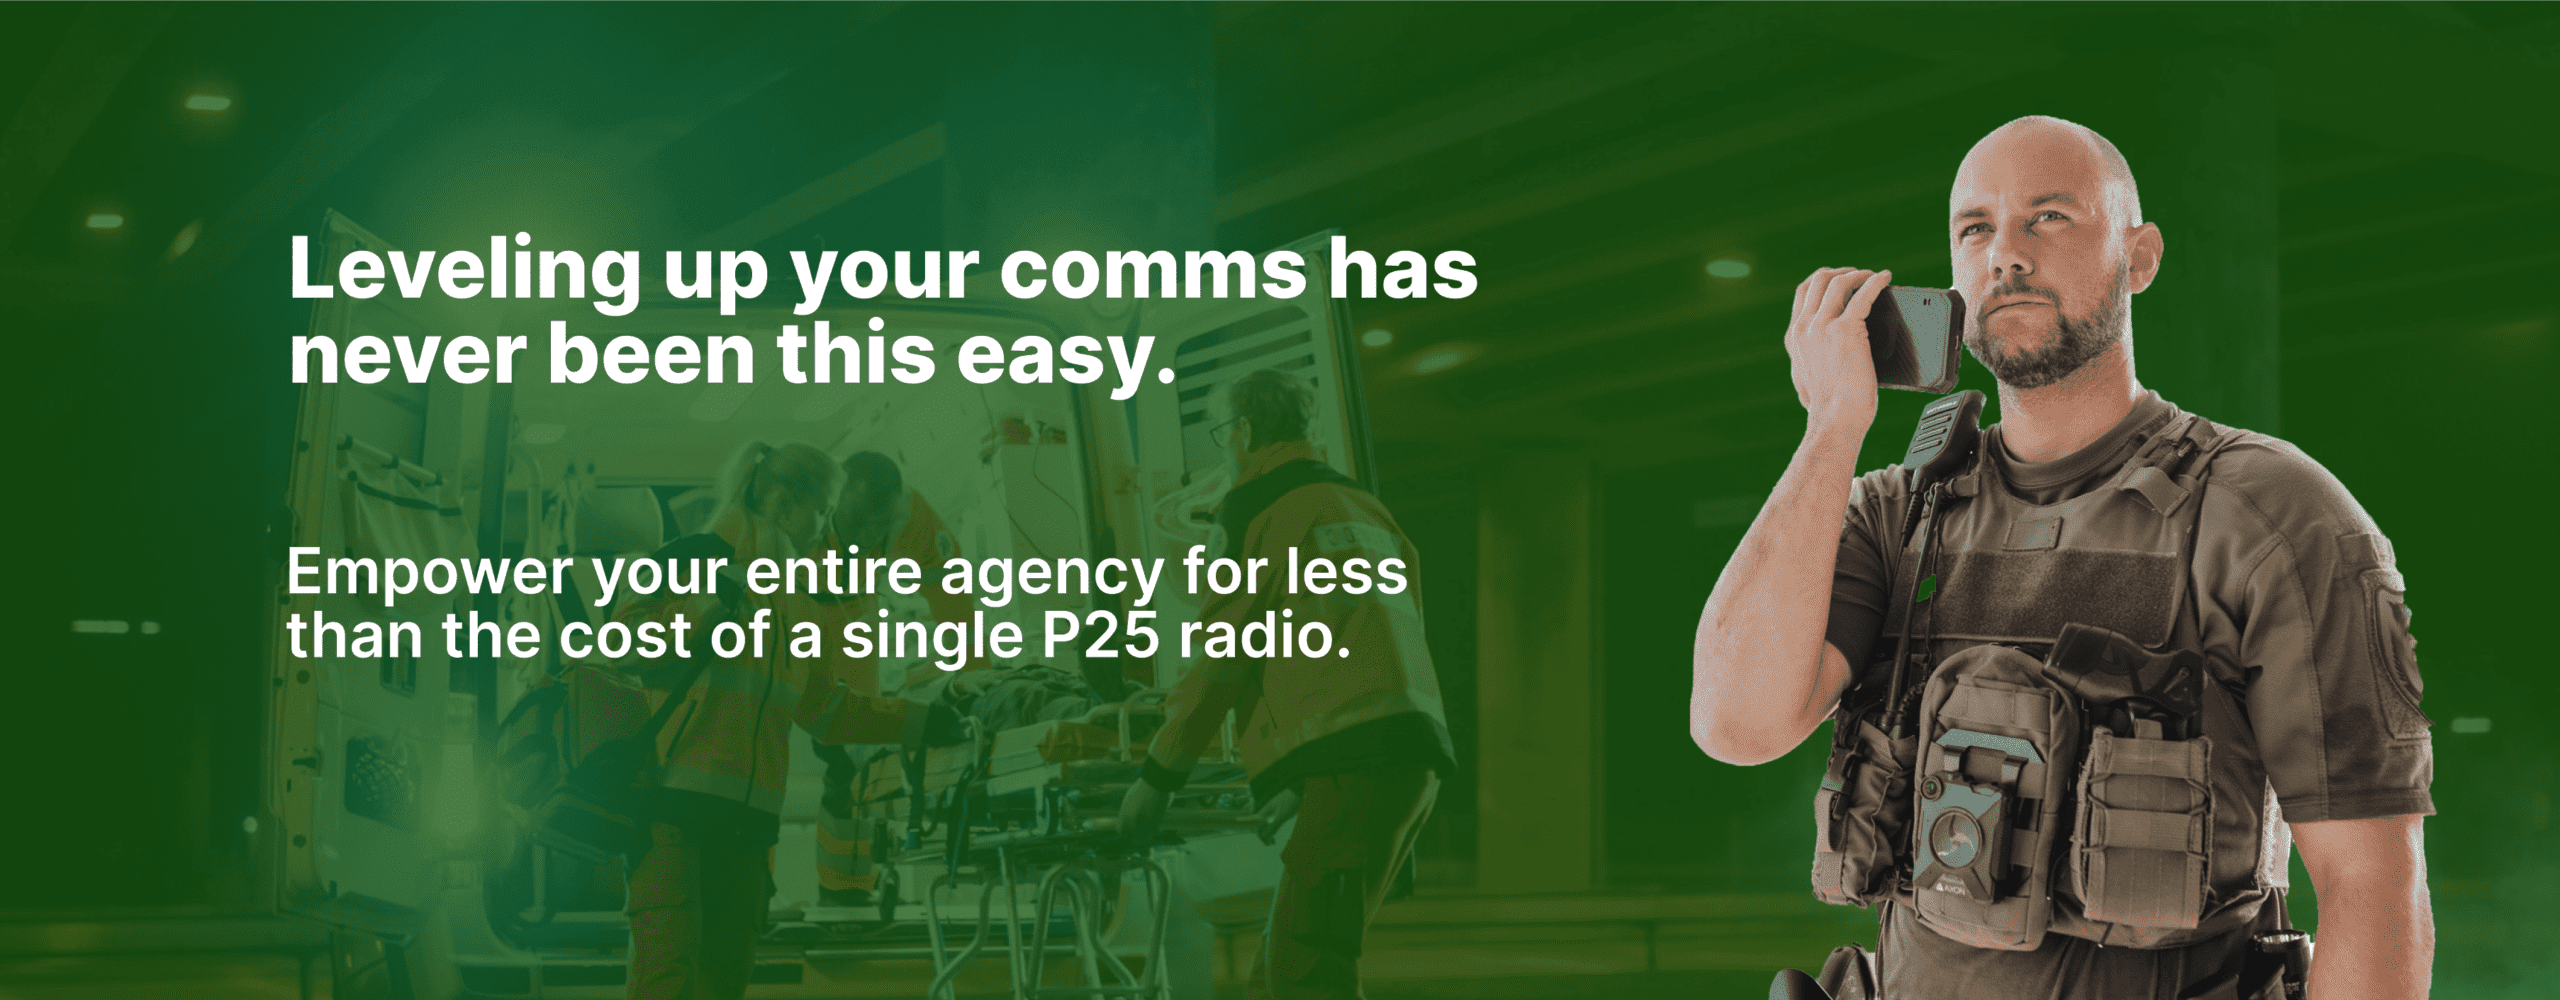 Level up your comms with Tango Tango